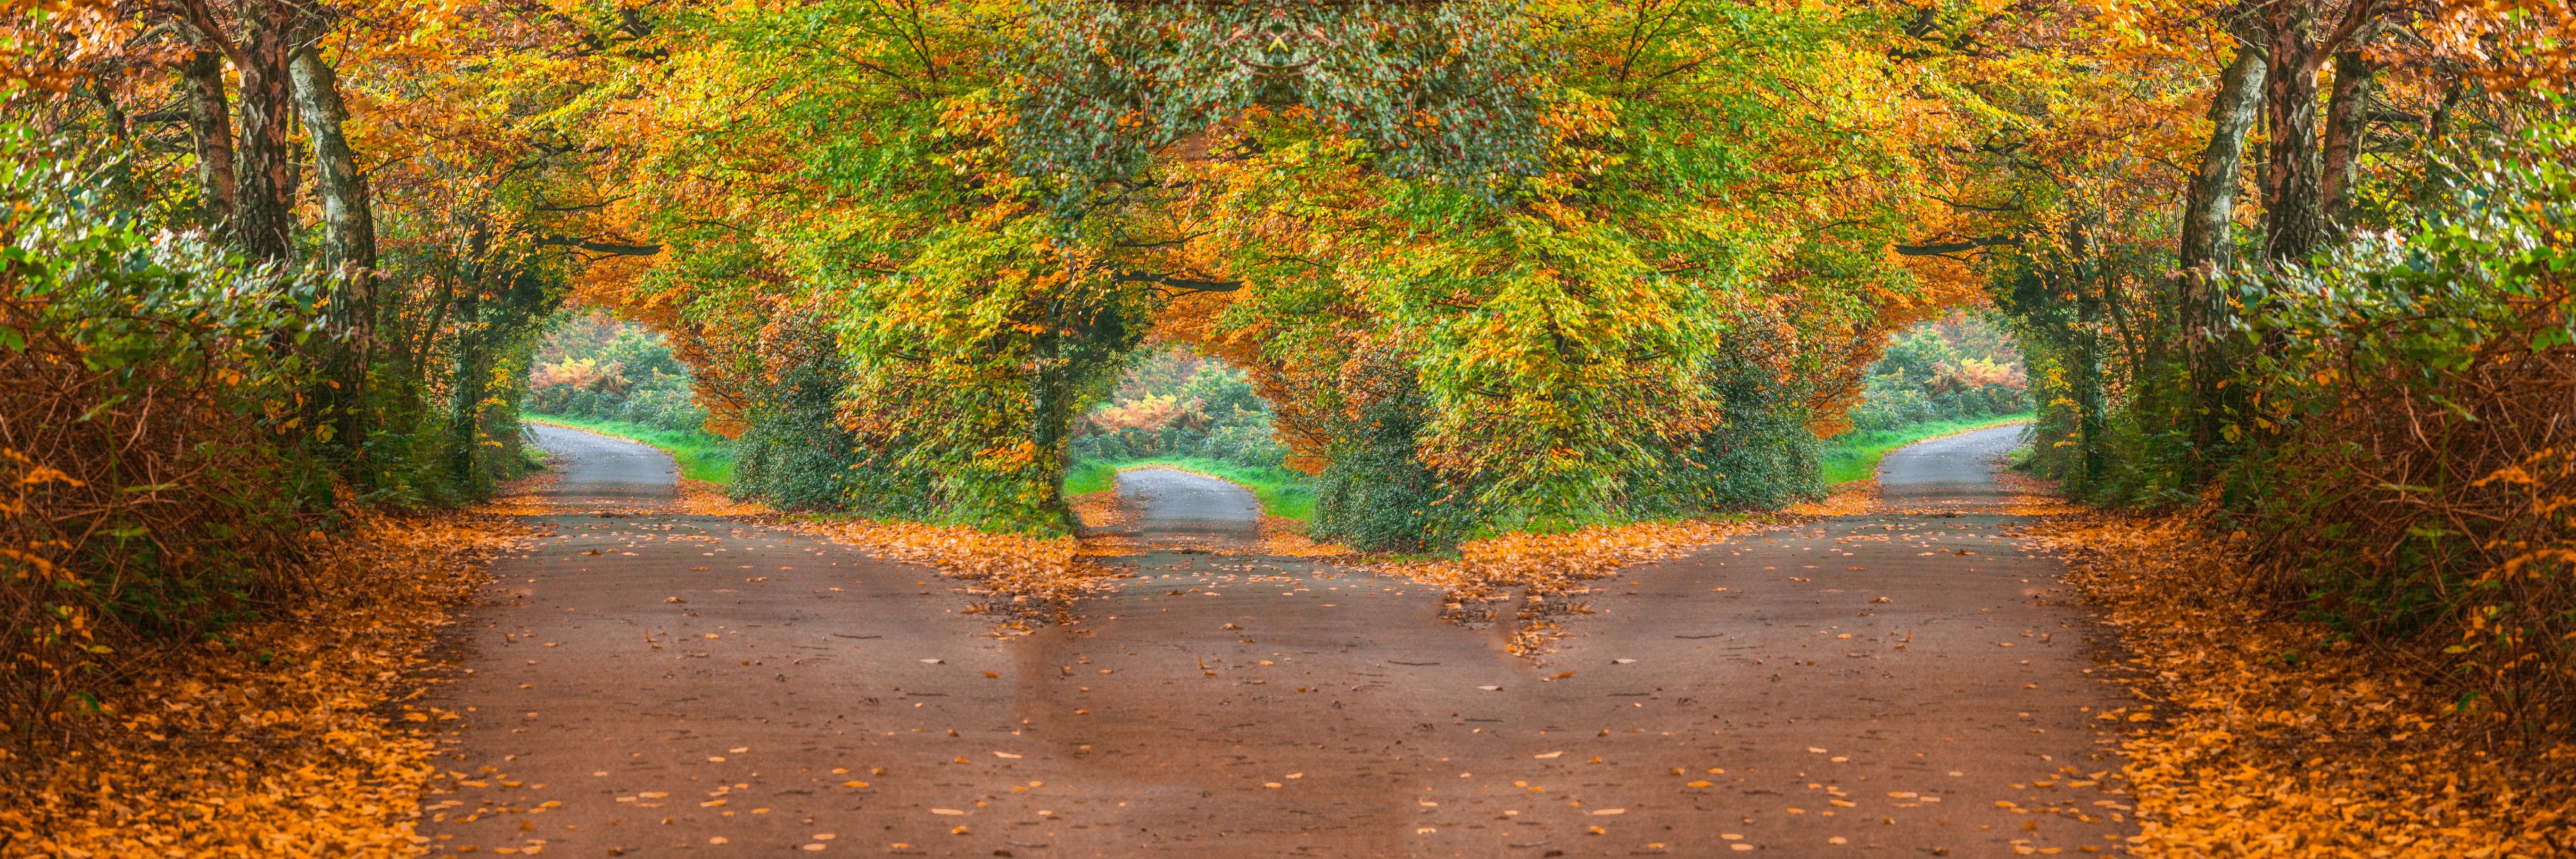 Country road in fall with three diverging paths